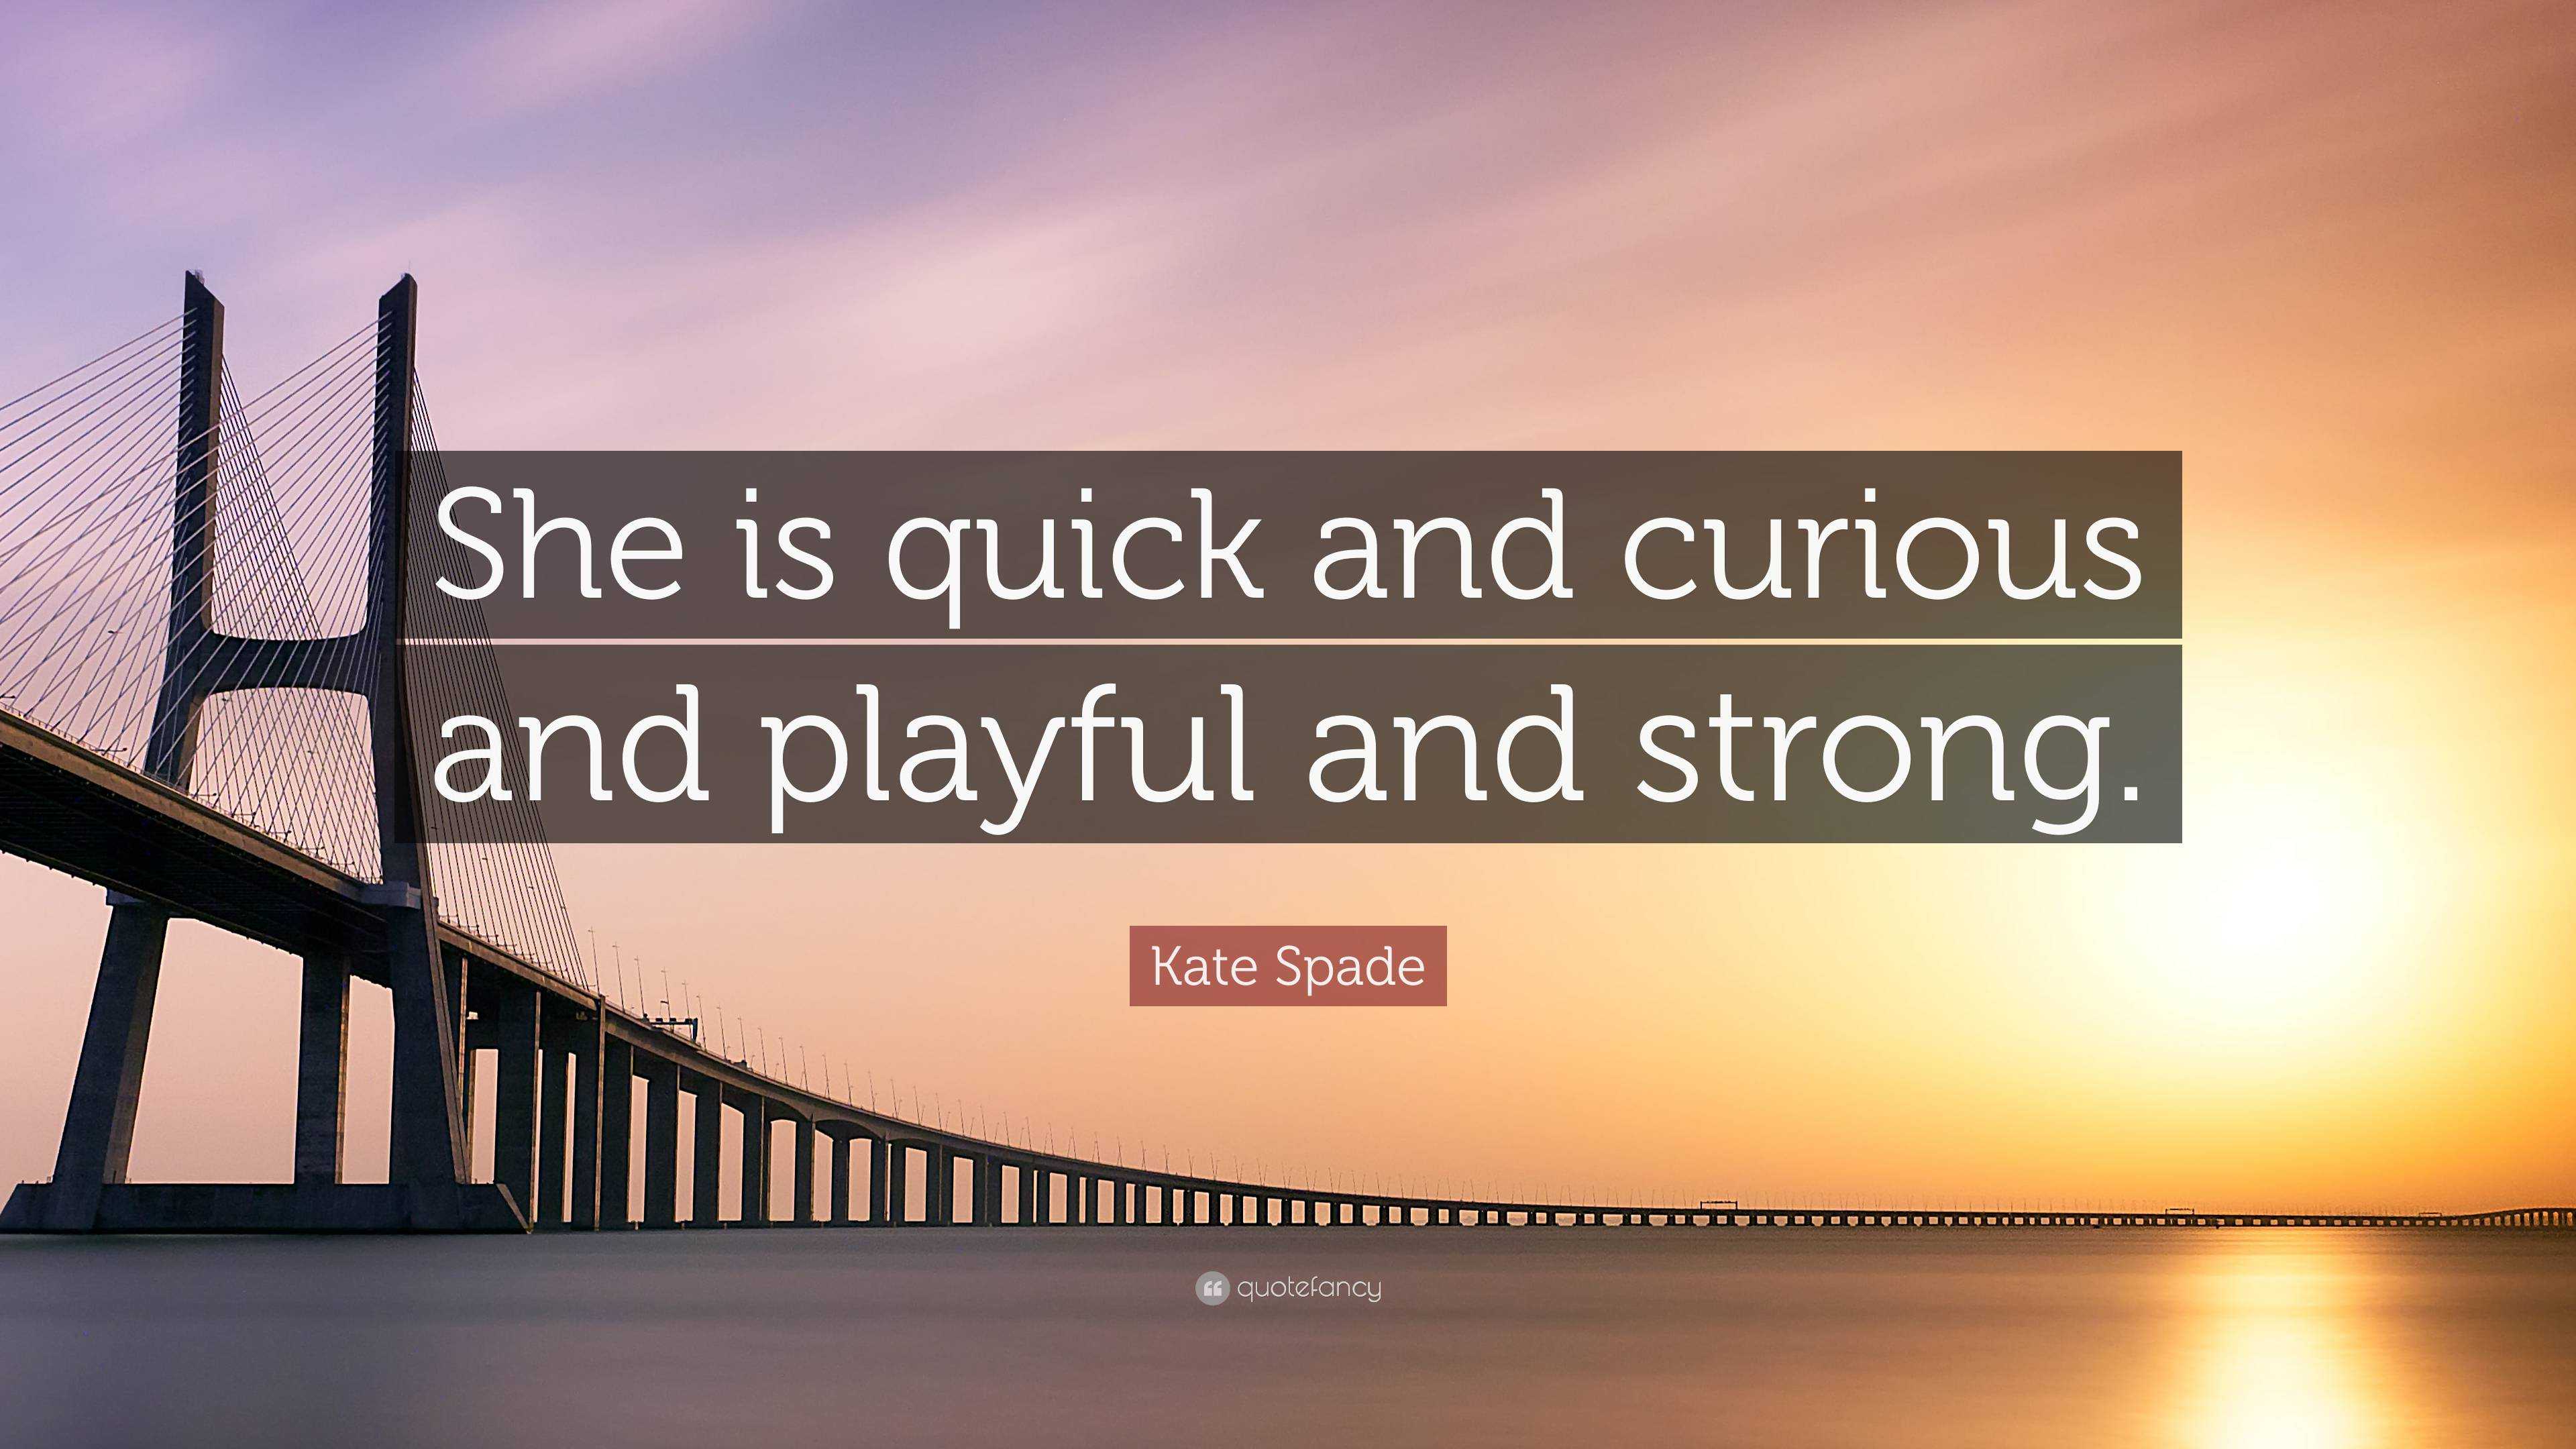 Kate Spade Quote: “She is quick and curious and playful and strong.”